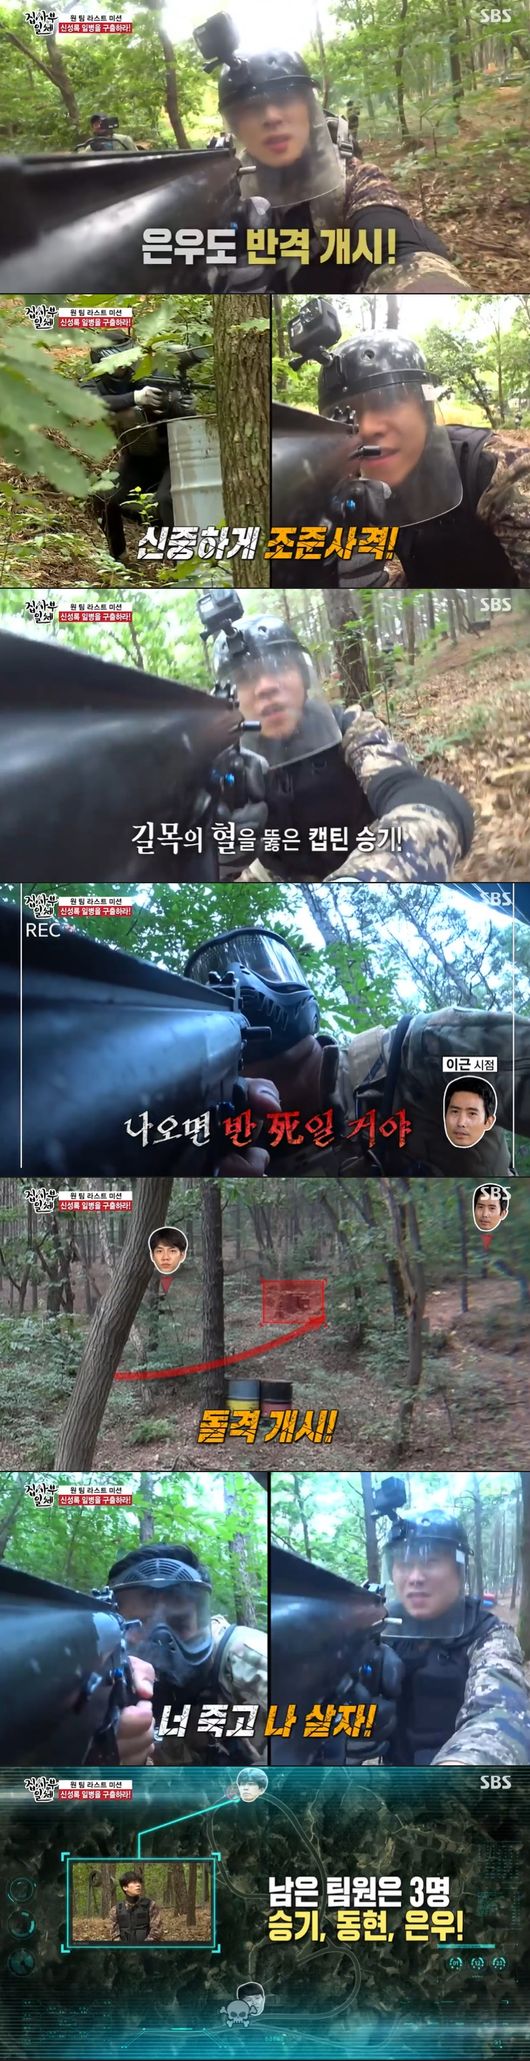 In All The Butlers, UDT training with Lee Keun Captain was successful, and all succeeded in the rescue of Shin Sung-rok with perfect teamwork.UDT Legend Captain America: Civil War Lee Geun Captain appeared as Master in the entertainment All The Butlers broadcast on the 20th.UDT Legend Captain America: Civil War Implant Captain has started training to become One Team.First, Lee Kahn Captain introduced the Bob Girl education method while preparing meals before training, and showed a crossFit demonstration called UDT tradition.I looked at Lee Geun Captain who showed CrossFit Jeongseok and admired it as Terminator.Following the charismatic Lee Geun Captain, the members also tried CrossFit.Shin Sung-rok, Top Model, perfect pose than thought, and Top Model smoothly, but failed with a total of six, and the iron rod meal was confirmed.Next was Lee Seung-gi, who was the top model; Lee Seung-gi, who was devastated in the second inning, did the 10th with the pride of a privileged fighter.Lee Geun-Captain also praised it as good, action actor.The mood drove Yang Se-hyeong to the top model, making 10 lightly with a stable pose.Kim Dong-Hyun followed by Jung Eun-woo, the last car, with a perfect pose, Top Model, lightly succeeded in 10.In the end, Shin Sung-rok won the iron bar.After a hard training, I shared my meal with a lunch box, and Shin Sung-rok, who ate alone at the bar, laughed when he said, Feelings boiling on the top of the mountain.Members asked about UDT training at Lee Geun-Captain.Lee said, It is impossible, it is a unit that makes impossible possible. There are many difficult operations because the country is a unit that should be trusted, but any operation should be successful. He said.When we are in action, we ask Feelings, I do not have time to feel fear or fear, he said. If the war is perfect, if someone is not lucky, someone can die. It is more responsible than fear that what kind of operation will succeed and protect the team members.Lee said, The reality can not predict all the risk factors. He gave a message to the lives of the privileged members who protect the nation with their lives as collateral.He then asked whether he was married with a private question.Lee said, Family matters are private, and the family can be targeted when the enemy attacks the special forces. He said that he does not disclose it because he and his family can be in danger.I think that soldiers have the best job, even though they have a small salary, and I am proud of every privileged member, the members said, Respects of Korean soldiers.We started with UDT gun training in earnest. Lee Geun-Captain pulled out the training weapon and the members attention was focused.Lee said, If you get misplaced, you can die. He started a close combat training mission with a serious attitude from the shooting posture practice.Lee said, It is not a personal technique but a team tactic. He said that he should summon Park Jung-sa, an army 707 specialist, and calculate the rotation of the earth based on wind direction, wind speed, temperature and humidity.He also explained the target of the sniper and was surprised to hear the operation of One Shot One Kill.At this time, Park said, Lee Seung-gis army acquaintance is under me. I actually heard that I worked really hard in the military, I went to Chen Li march. I also said that I had a limited warrior. Lee said, Did you march Chen Li, great? Please boldly edit this part, said Hong, laughing.Lee and Captain and Park continued to train with UDT in 707 joint training, and reported close combat training.He told the mission to carry out a terrorist suppression mission, and when the team work is out of order, both the operation and life are dangerous, and informed him of training to strengthen faith and breathing among team members.First, Lee and Park hit the enemy with a perfect sum, even if they did not match the Top Model.The two men said, As a result of the training of the repetition, it is ripe for the body.Next, Kim Dong-Hyun was the top model on the close combat training mission, but he was laughing in a mistake-filled position.After the training, Lee said, I was nervous because the gun was coming and going, he laughed at Kim Dong-Hyuns training.Lee Geun-Captain suddenly raided the members rooms at dawn, and Kim Dong-Hyun, Yang Se-hyeong and Shin Sung-rok, who could not memorize their codes, were summoned to the lineup.I am training at UDT every day, and I am ready for this failure, said Captain.Early the next morning, Lee Geun Captain assembled members; everyone except Shin Sung-rok.In all of the worries, Lee said, Do you know where the team is? I left the team.The full-scale comprehensive practice training was started, and the identity of the blockbuster mission was revealed.Lee Geun-Captain moved the members to the operation command and delivered the Shin Sung-rok rescue mission that was kidnapped by the terrorist.It was a dynamic exercise to develop the UDT spirit of not abandoning team members under any circumstances.Shin Sung-rok, who became a hostage, was immersed in the situation drama and began training fully armed with the UDT spirit of never abandoning his team members.In the forest of more than 3,000 pyeong, the members went into operation and started to move with one pair of two people.Lee Seung-gi applied this as he learned in training, showed the posture of Captain America: Civil War, and began the search according to Lee Seung-gis opinion.First Lee Seung-gi hit the counter forces correctly and crossed the road, but the counter-attacker, Lee Geun-Captain, was speedily charged and the confrontation was drawn.Lee Seung-gi bravely advanced forward and led the team and covered the team.I found a supply box with perfect teamwork, and I returned it with Gillishsuit costume.With Kim Dong-Hyun and Yang Se-hyeong in-N-Out Burger, Lee Seung-gi and Jung Eun-woo near Shin Sung-rok.But another sniper remains. The root Captain came through the rear boundary, closely contacting Lee Seung-gi and Jung Eun-woo from the back.It was literally a close-up, and Jung Eun-woo was the In-N-Out Burger.Lee Geun-Captain gave Lee Seung-gi a 30-second chance, and Lee Seung-gi hit another Sniper.Lee Seung-gi, who put the final Sniper in-N-Out Burger, succeeded in rescuing Shin Sung-rok, then headed to where the injured trainees were.Finding all the team members back and returning together.But the training was over, but I could not keep the time limit of 30 minutes.Lee said, The mission was successful, he said. I brought all the injured people, but I was successful because I finished it together.All The Butlers broadcast screen capture